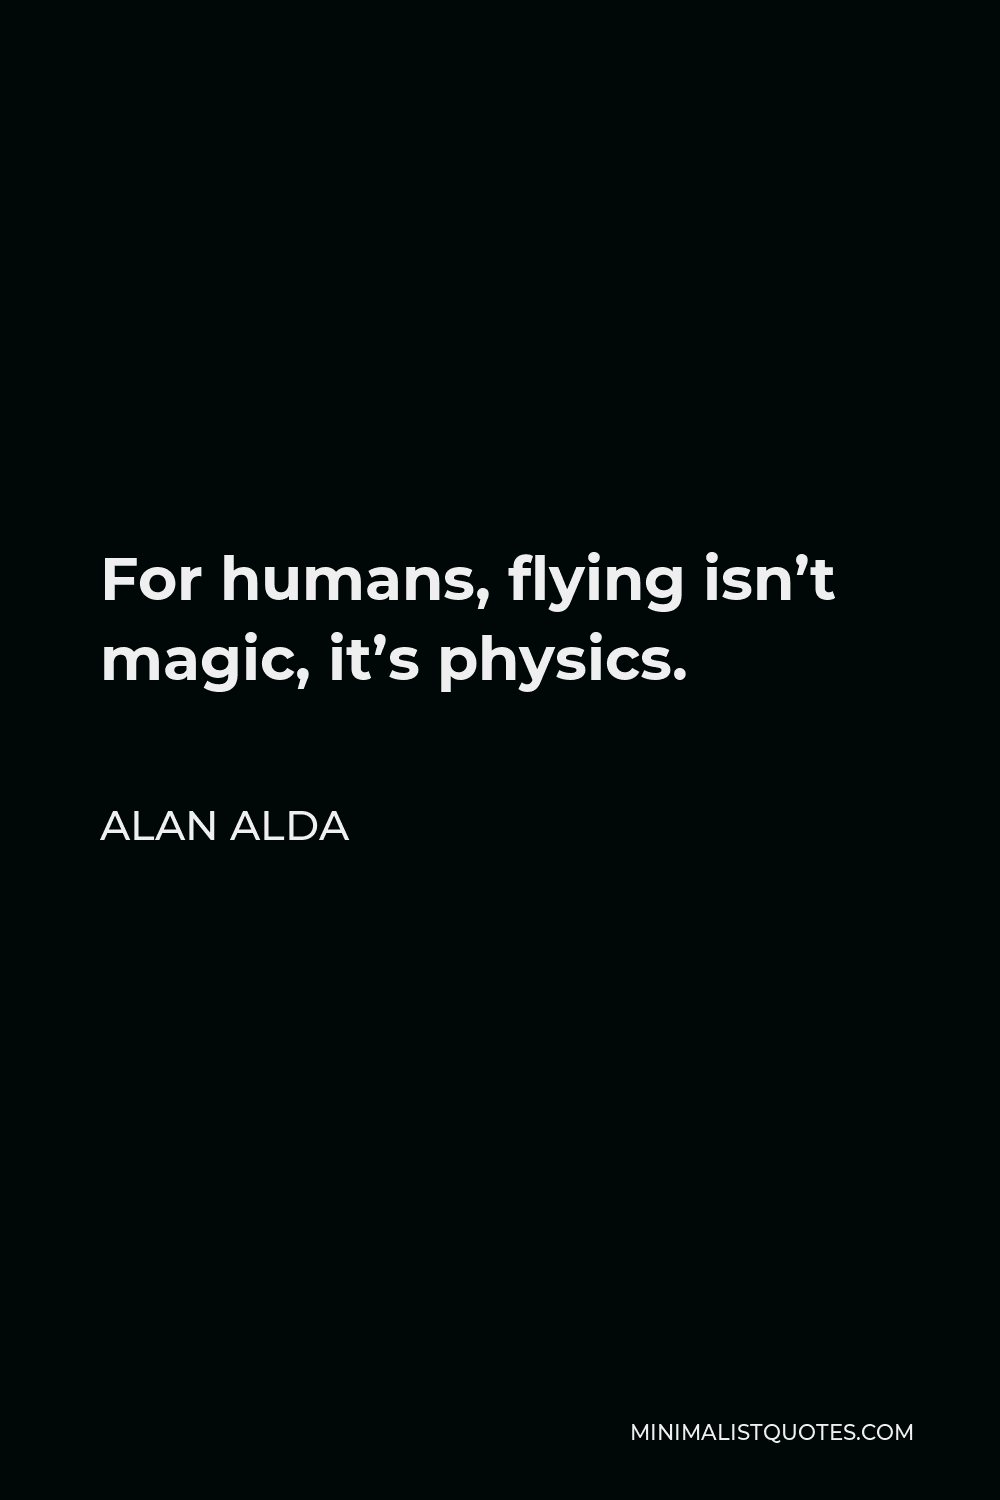 Alan Alda Quote - For humans, flying isn’t magic, it’s physics.